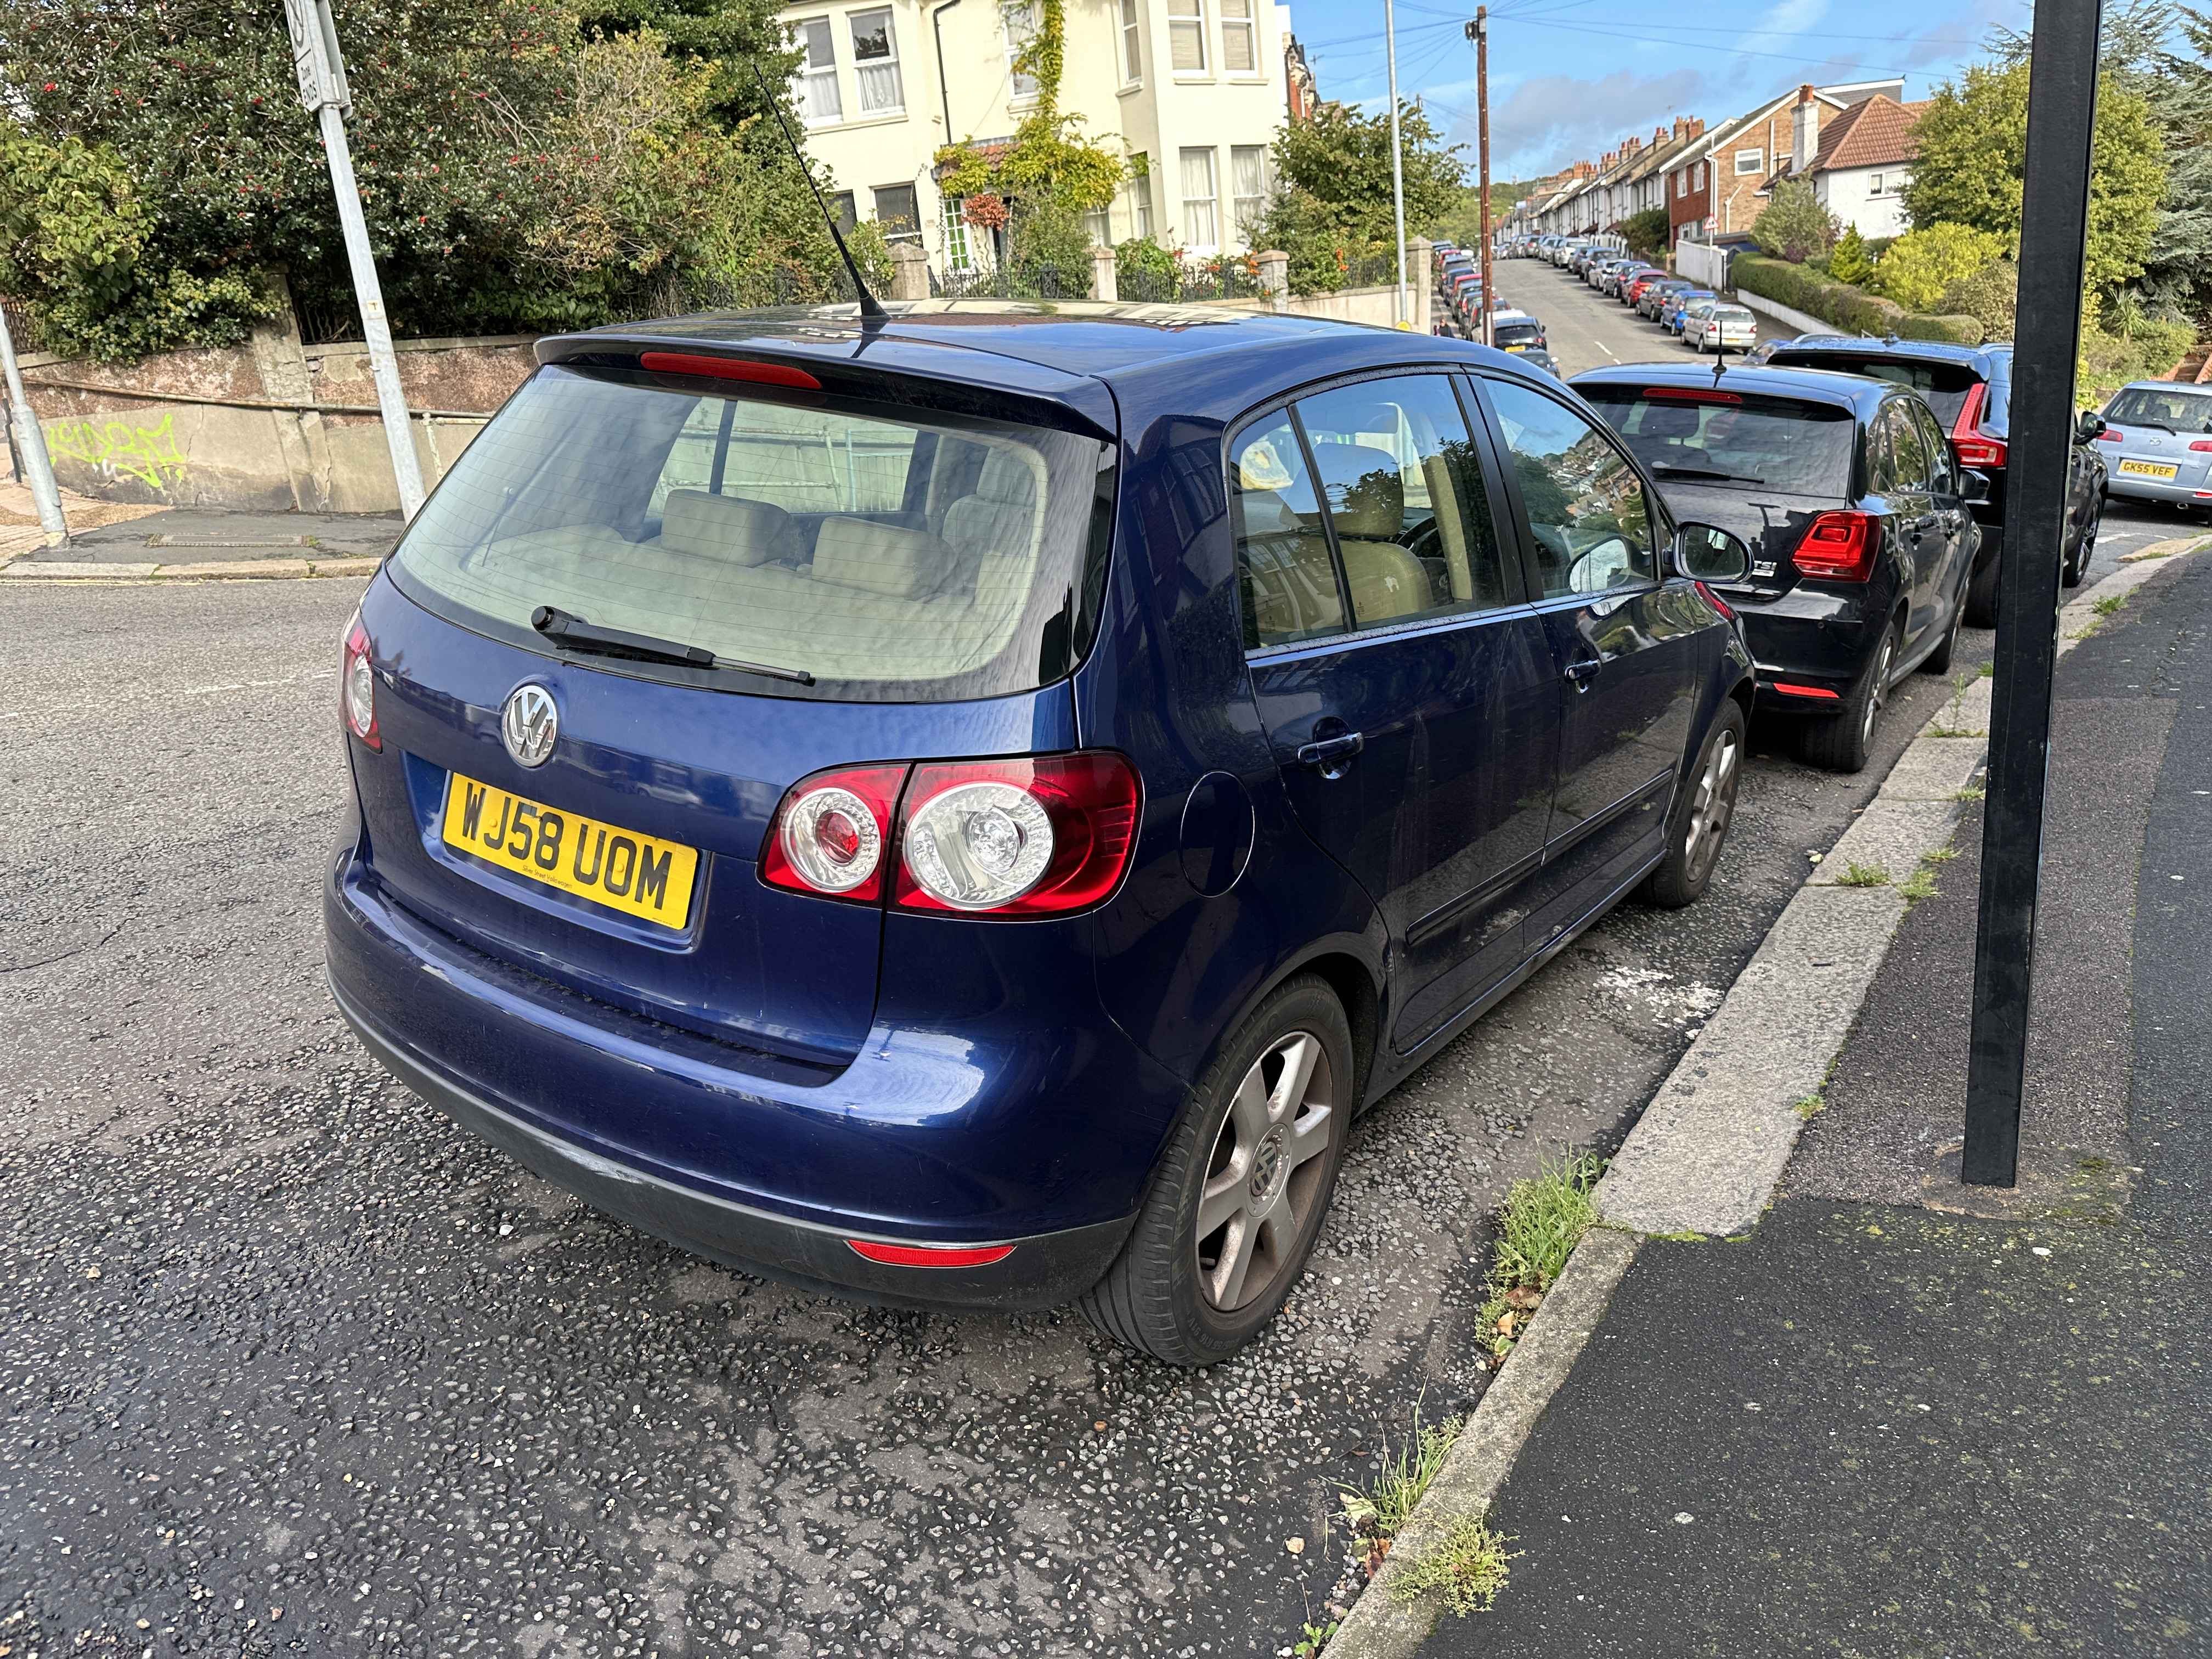 Photograph of WJ58 UOM - a Blue Volkswagen Golf parked in Hollingdean by a non-resident. The first of three photographs supplied by the residents of Hollingdean.